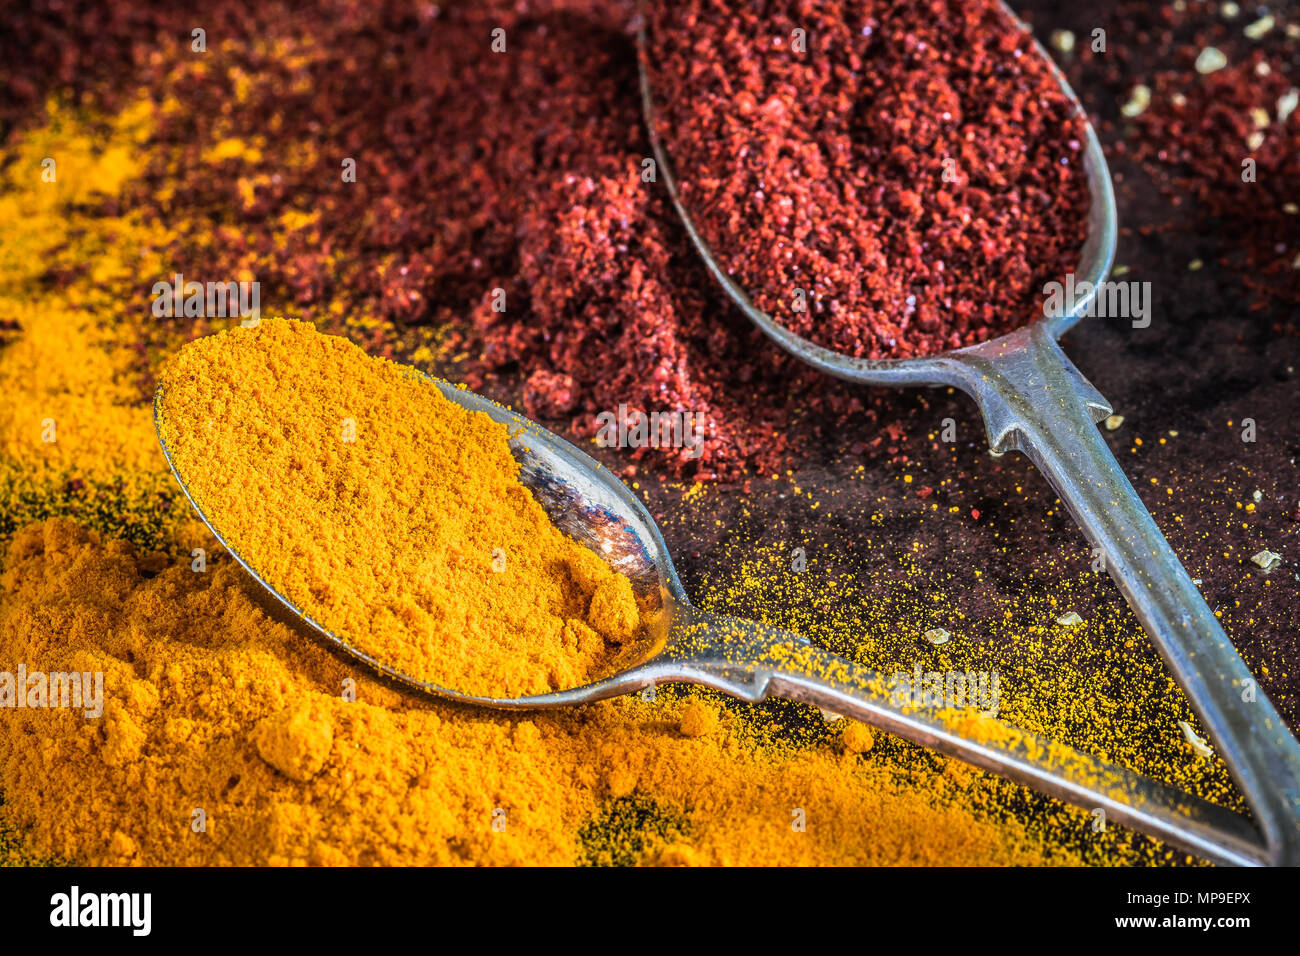 Various spices such as Turmeric & paprika on spoons, close up Stock Photo